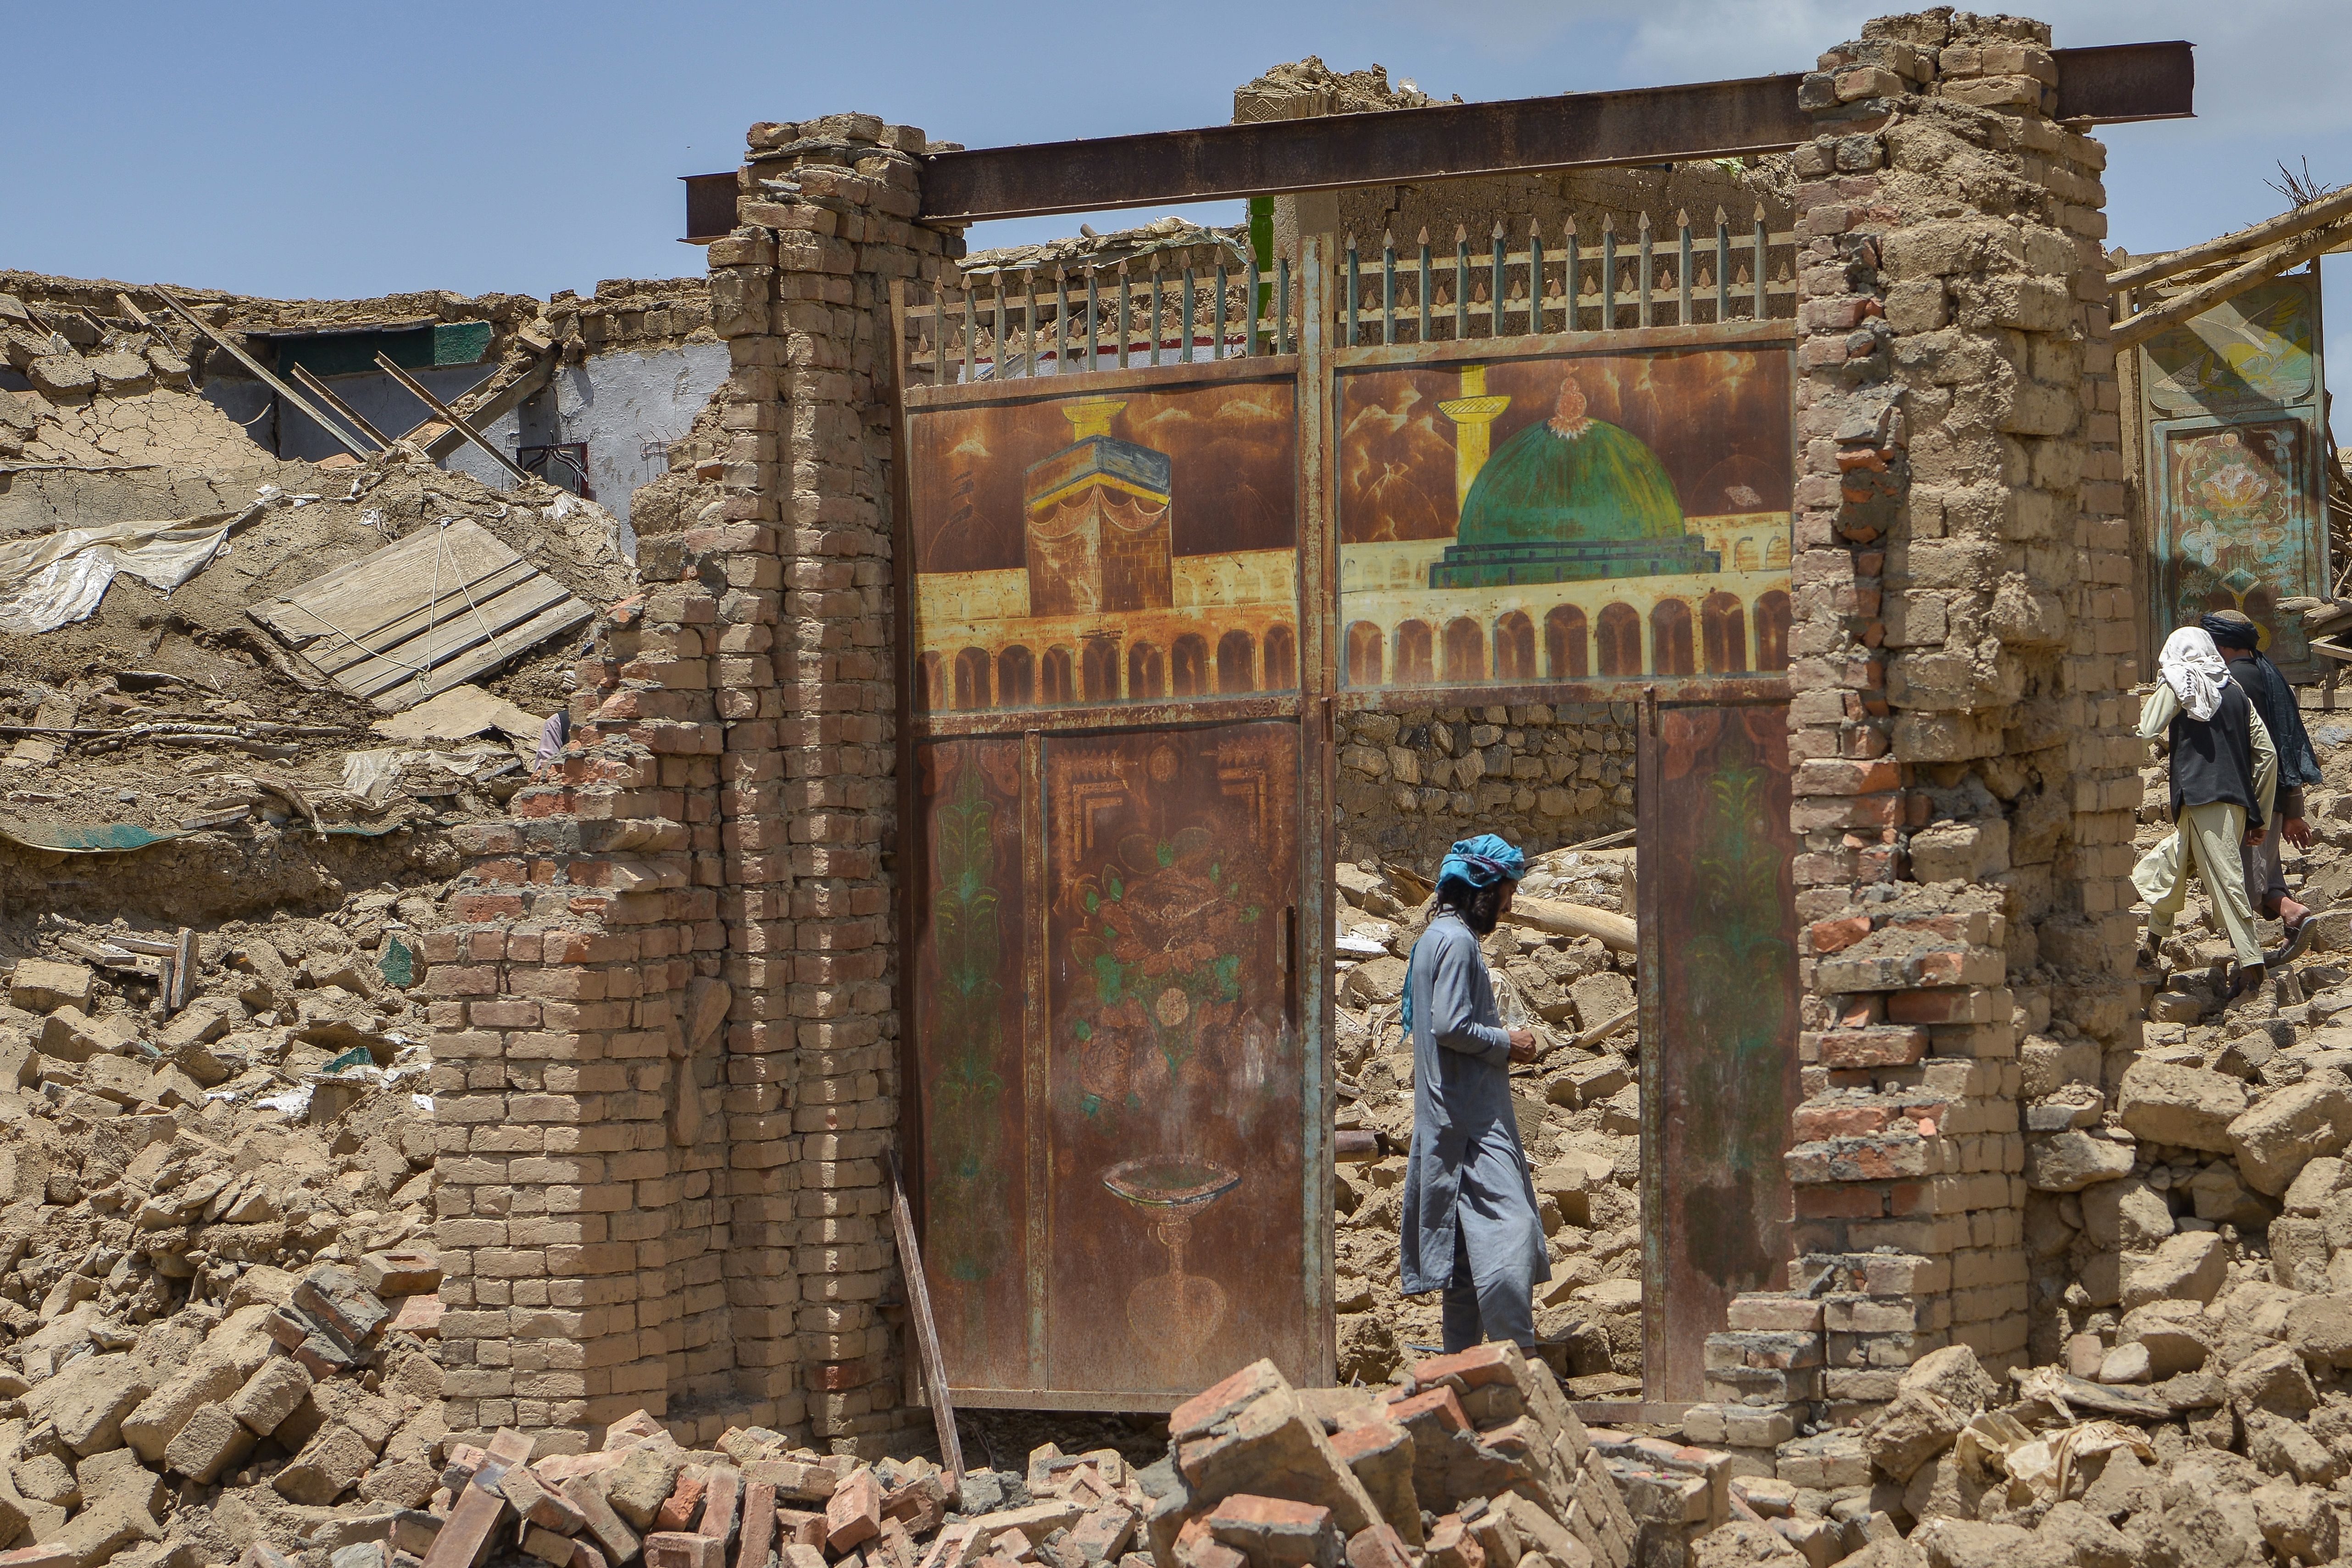 A man seen through a destroyed door frame with images of Islamic buildings painted on the frame.